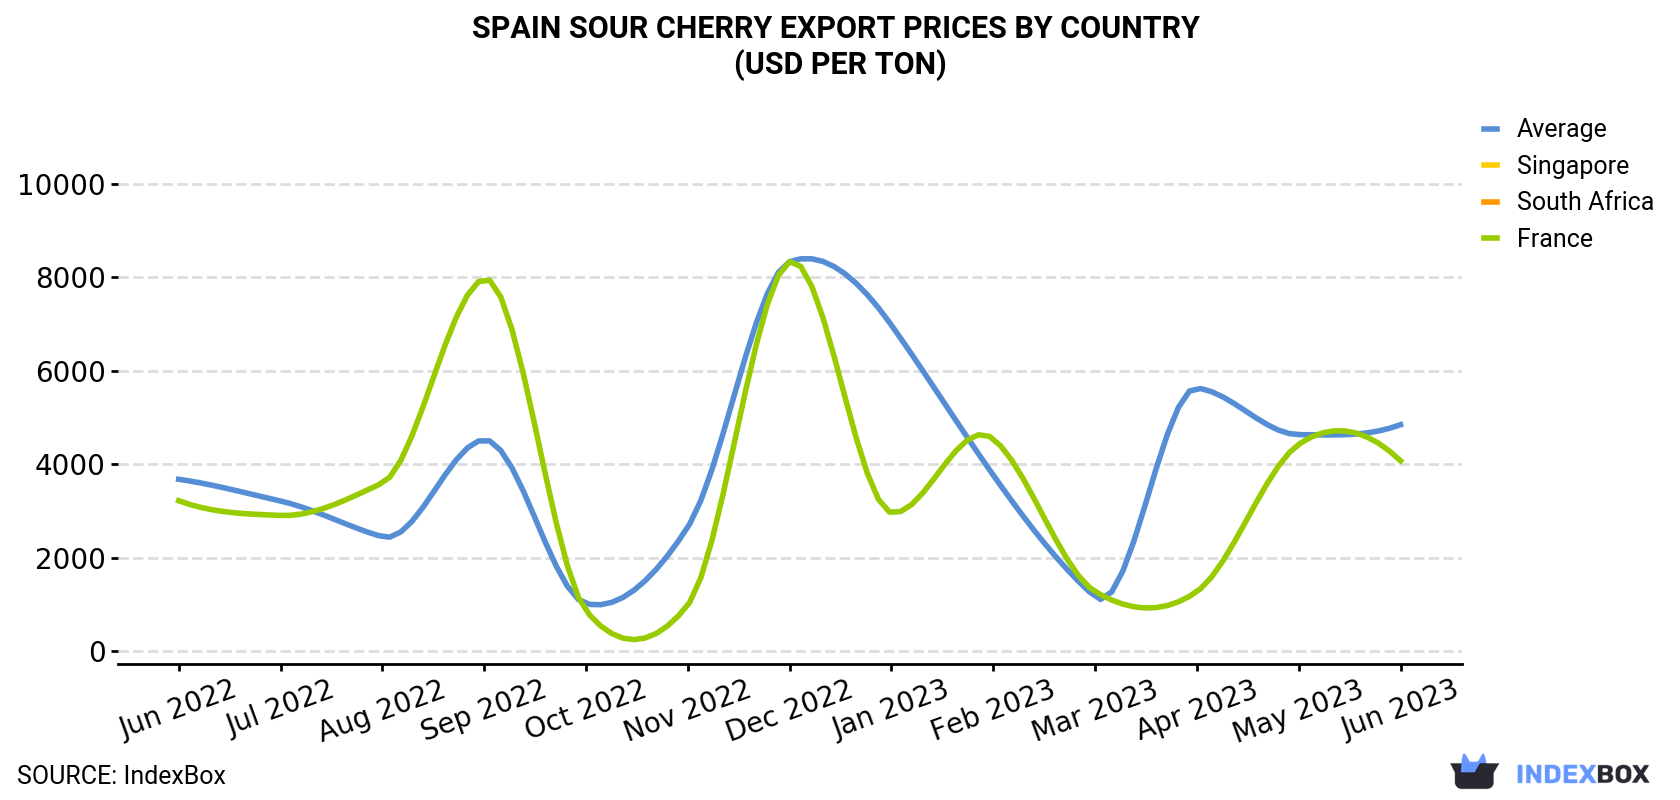 Spain Sour Cherry Export Prices By Country (USD Per Ton)